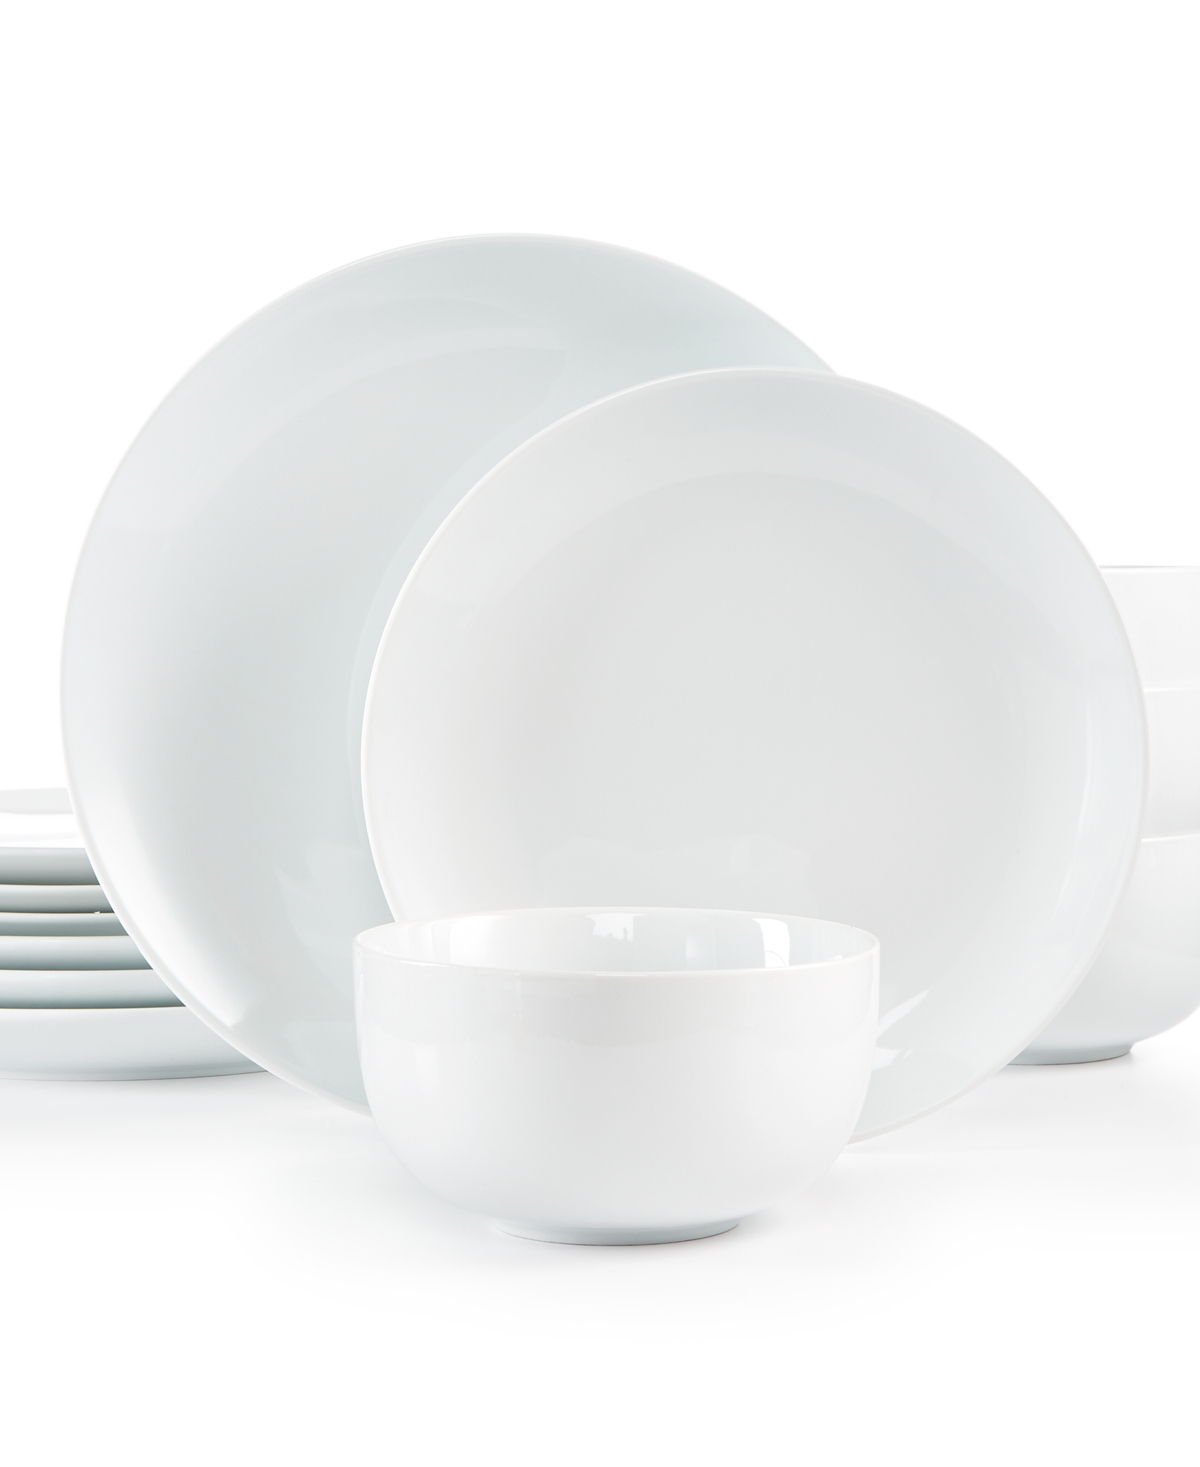 12 Pc. Coupe Dinnerware Set, Service for 4, Created for Macy's